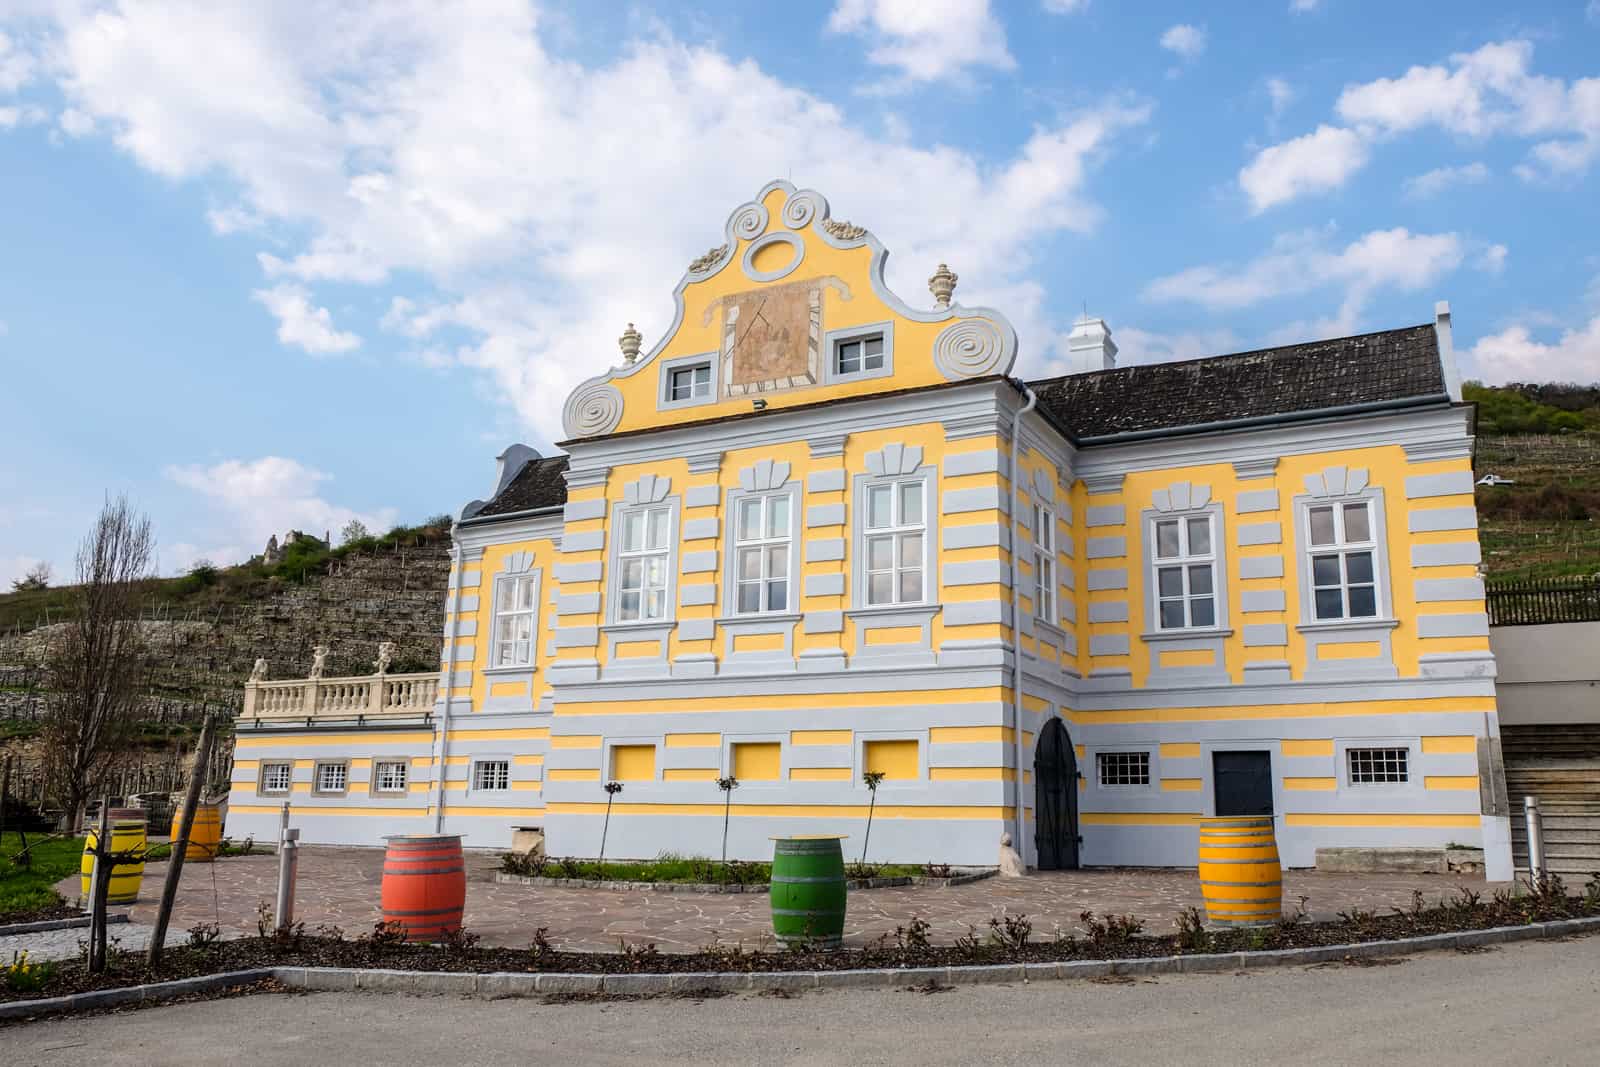 A yellow and grey classic looking building in a wine valley in Austria with yellow, red and green barrels outside